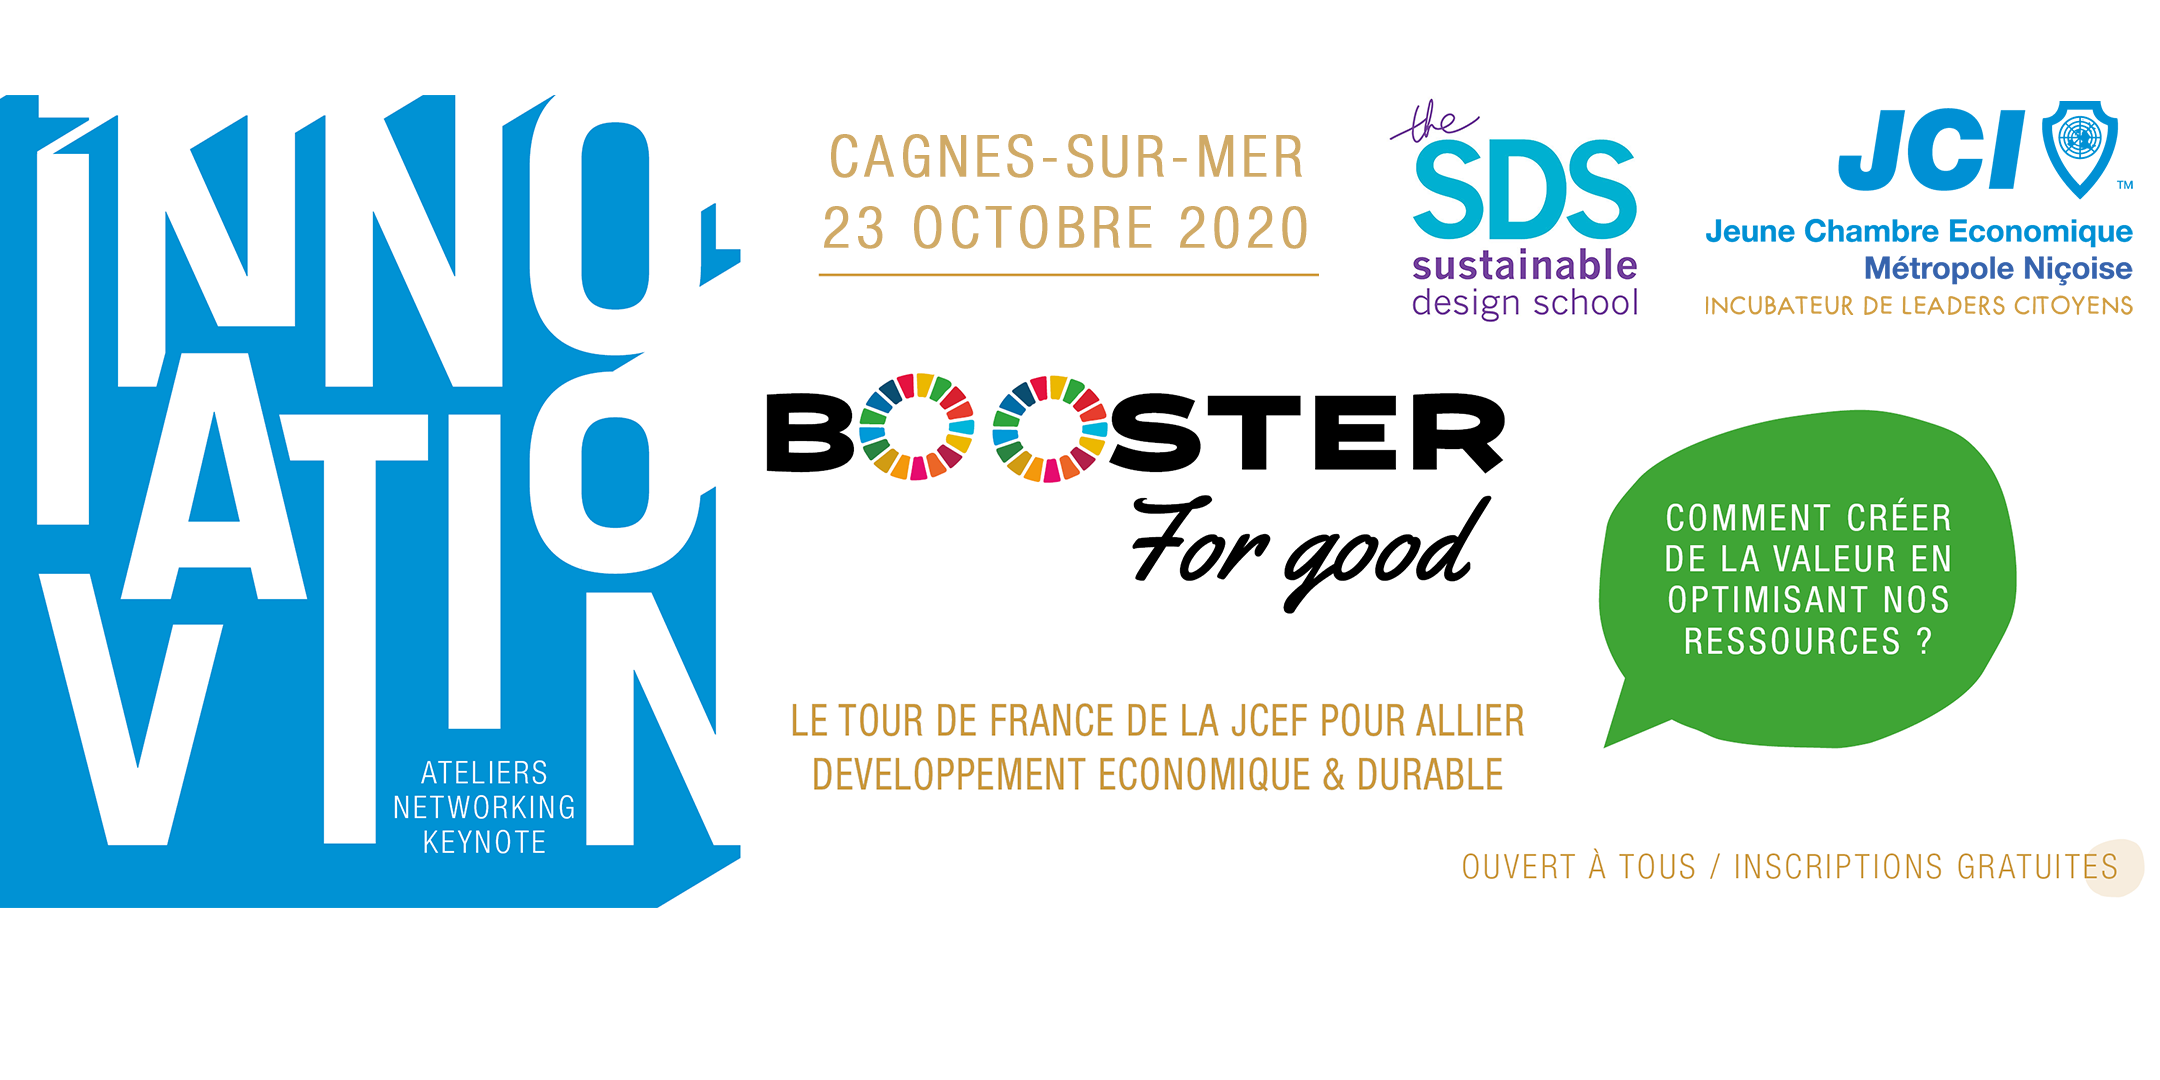 Booster for Good bannière